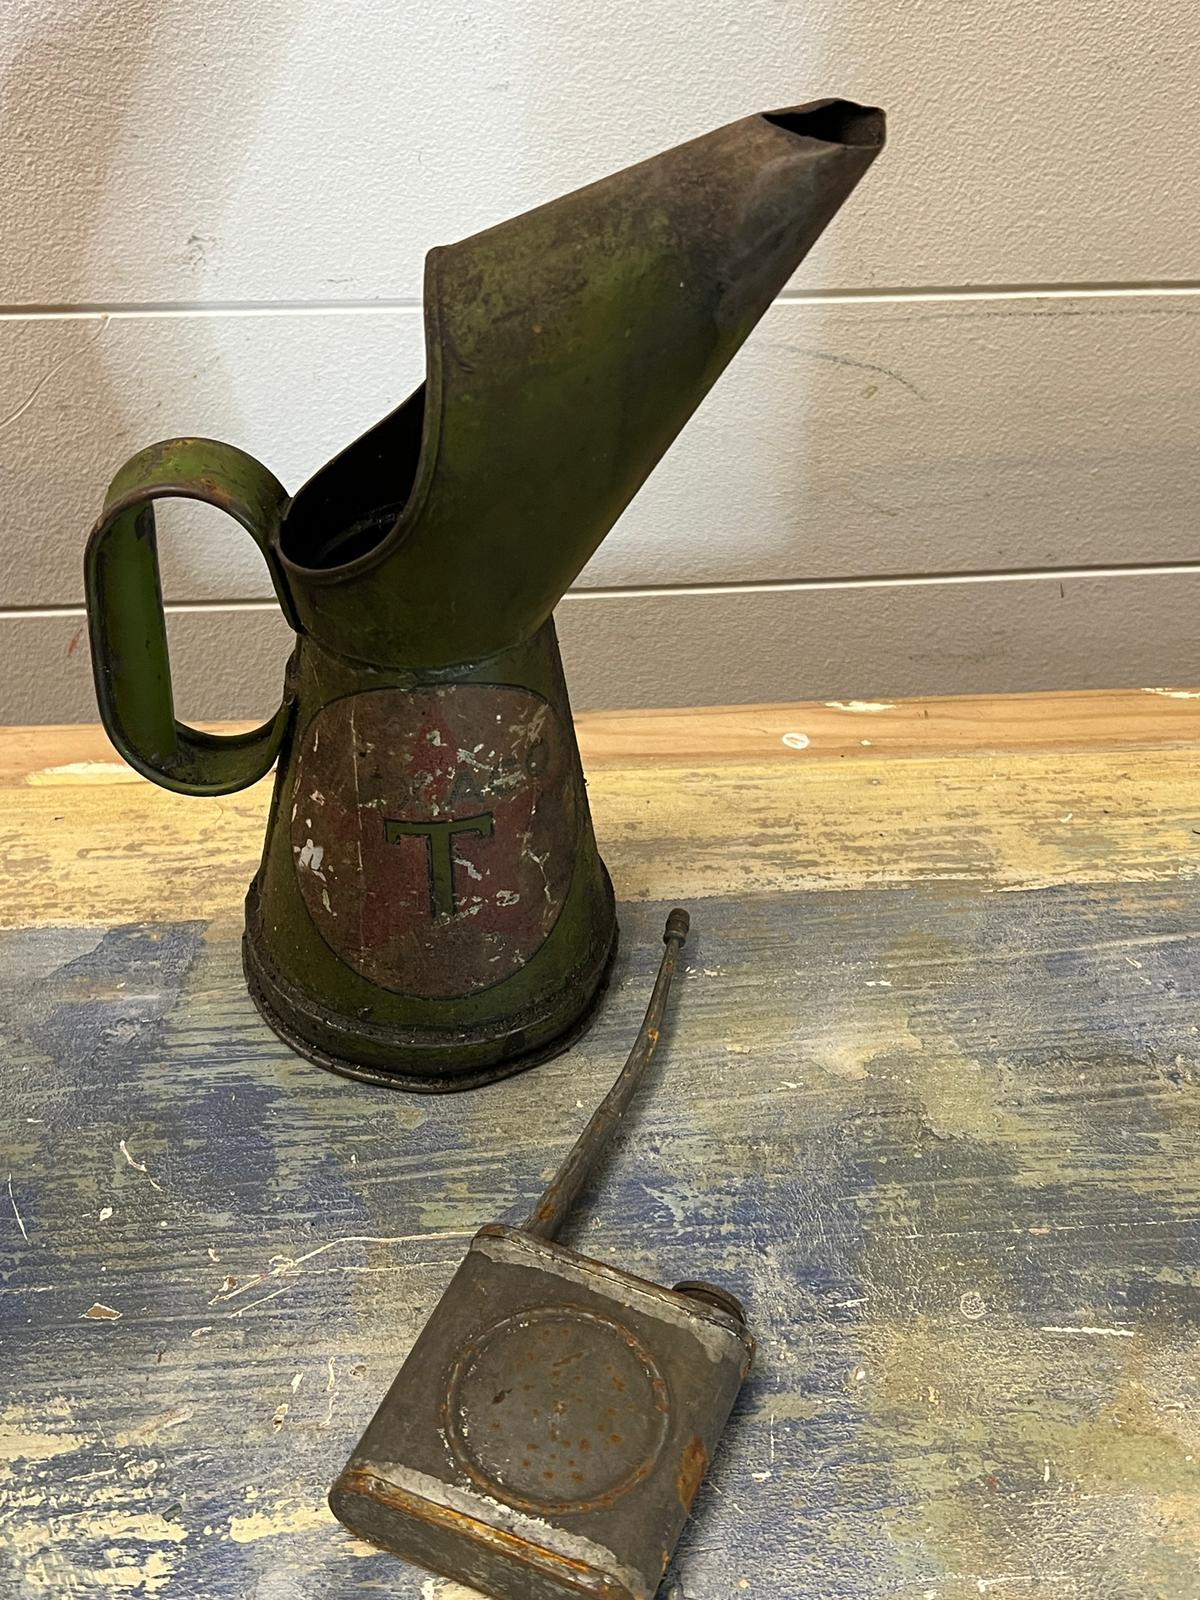 A vintage oil jug and a vintage oil can